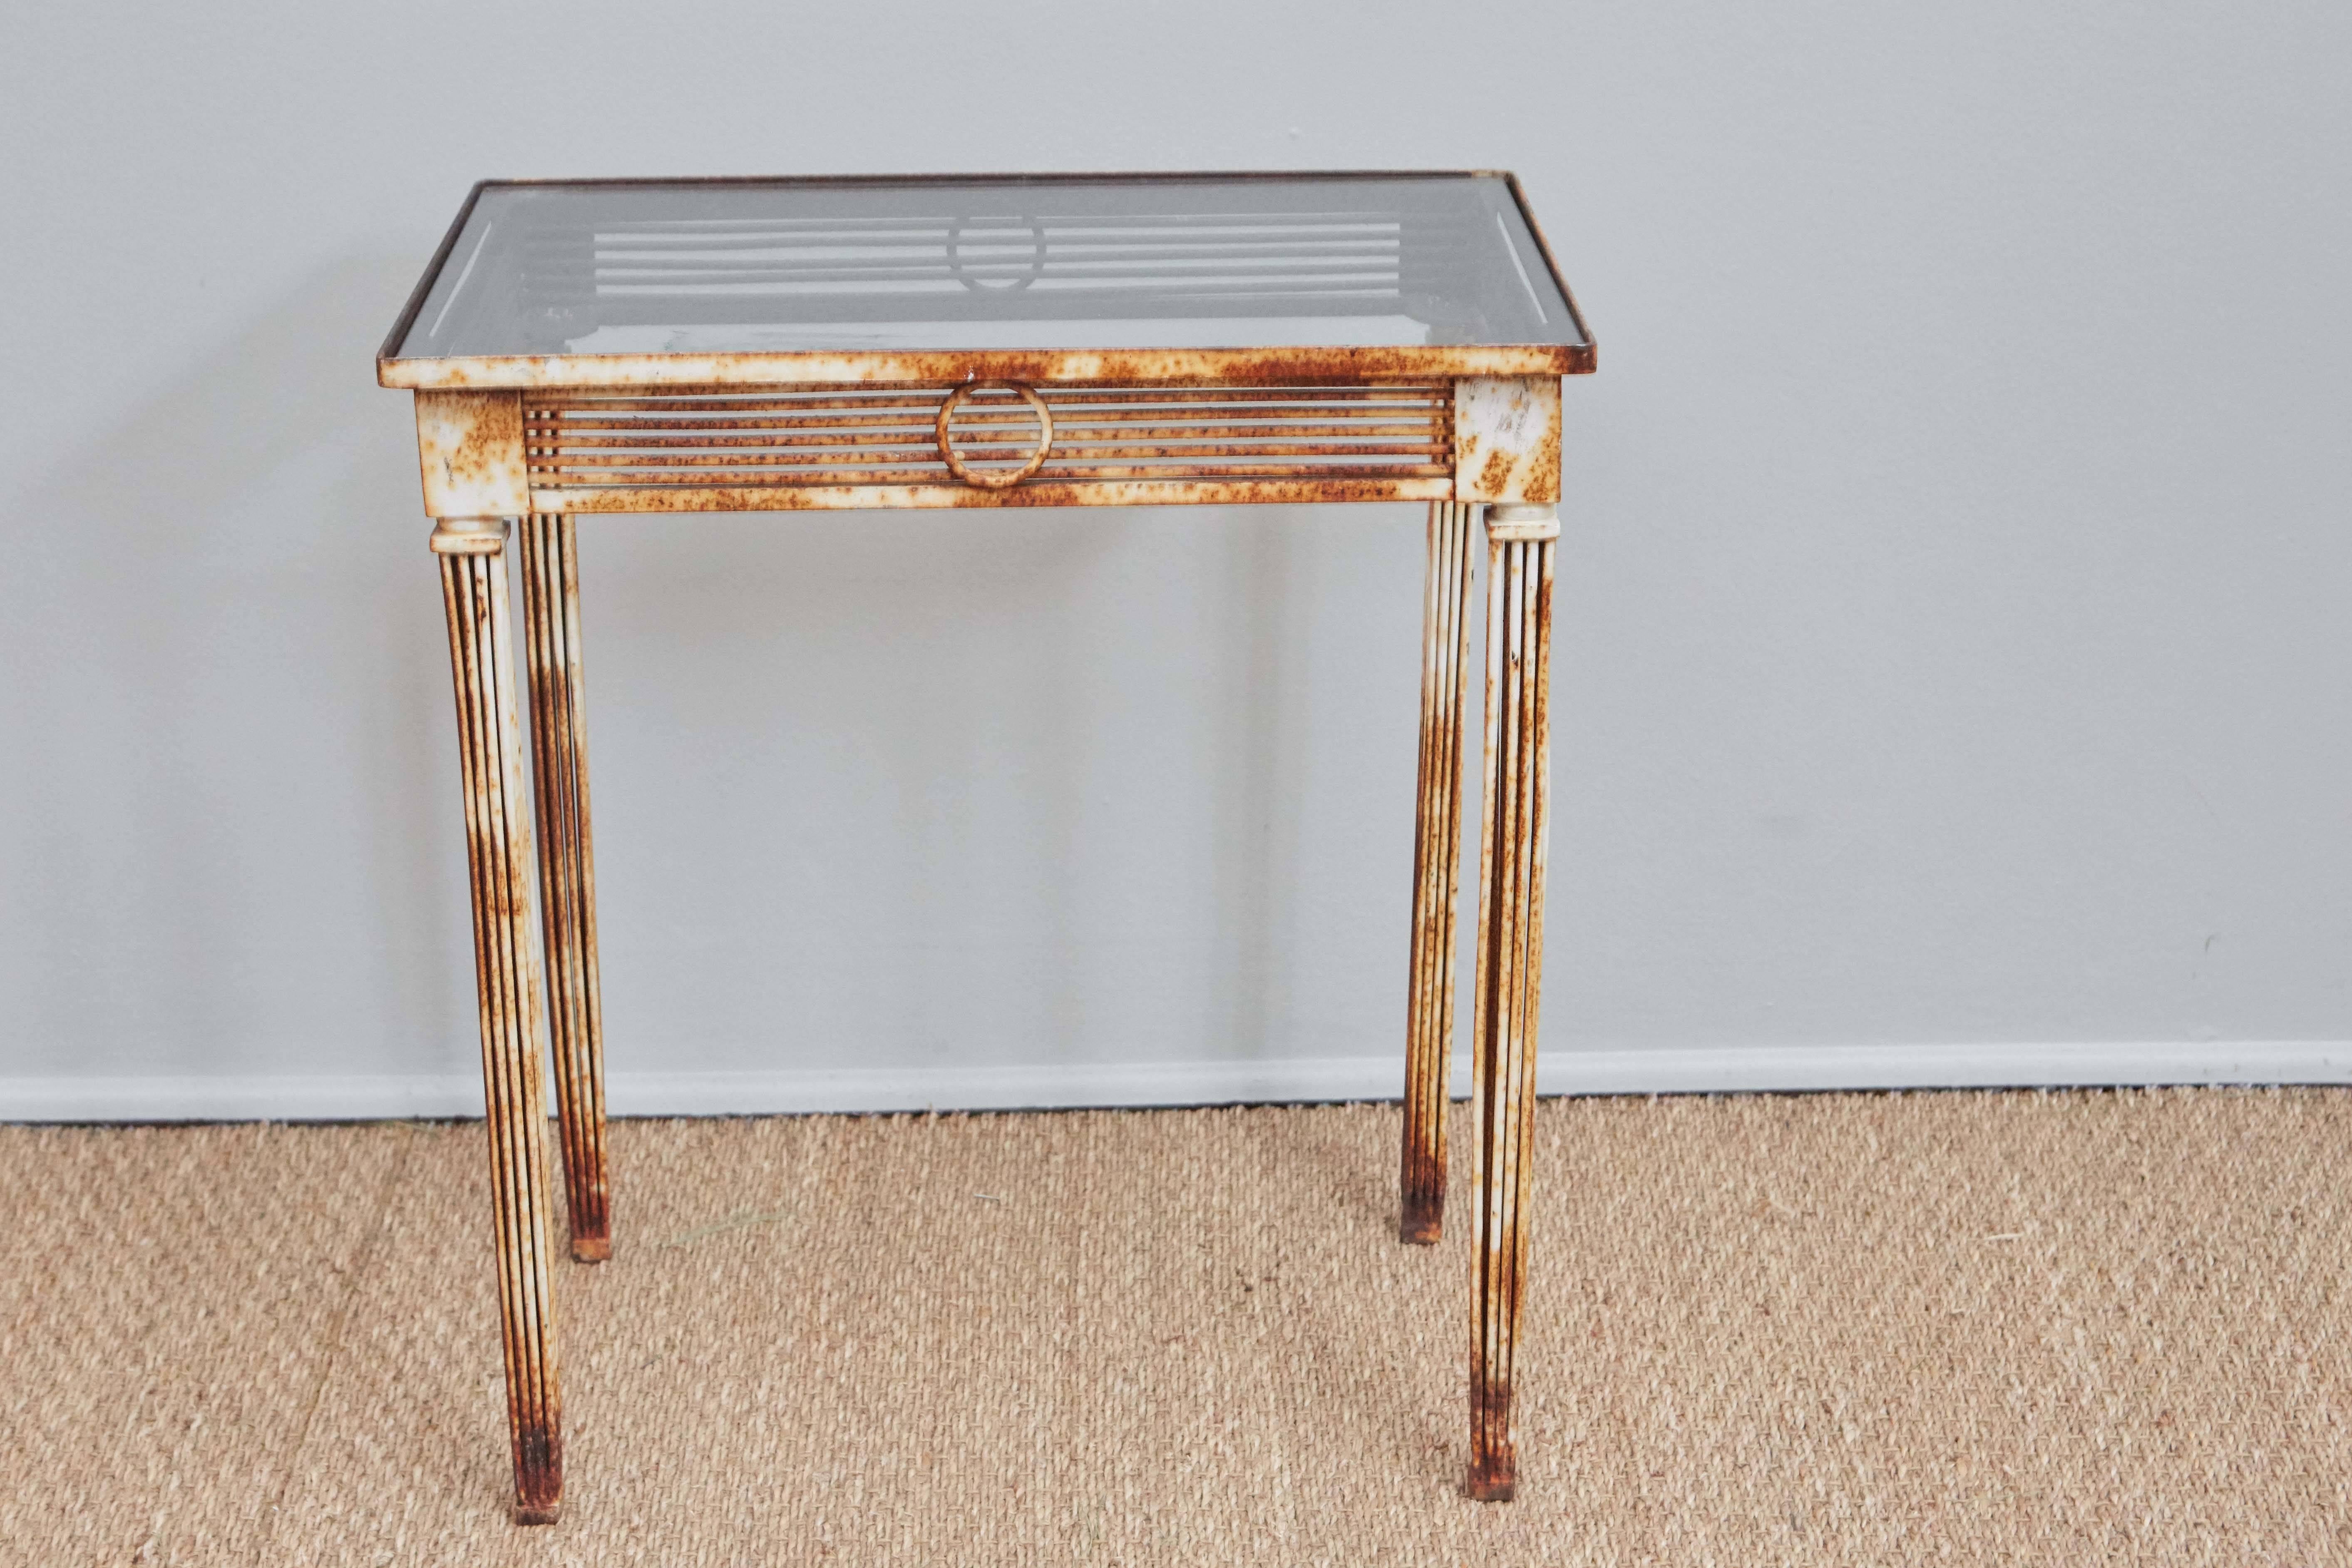 Original white paint rusted through. Glass top. Modernist take on neoclassical style. Measures: 20 W x 14 D 22 H.